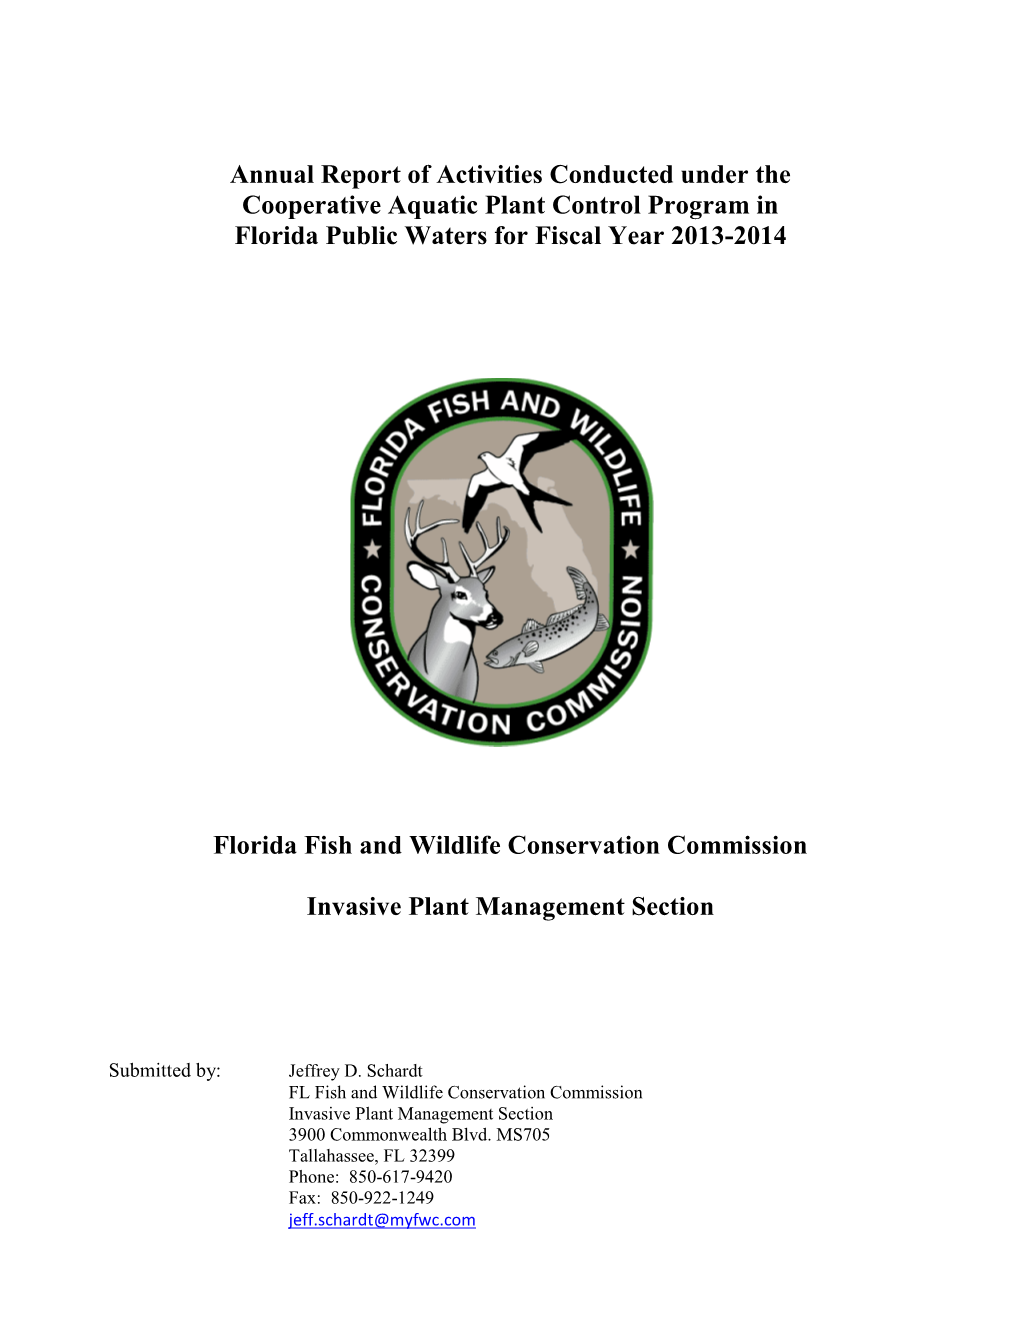 Annual Report of Activities Conducted Under the Cooperative Aquatic Plant Control Program in Florida Public Waters for Fiscal Year 2013-2014